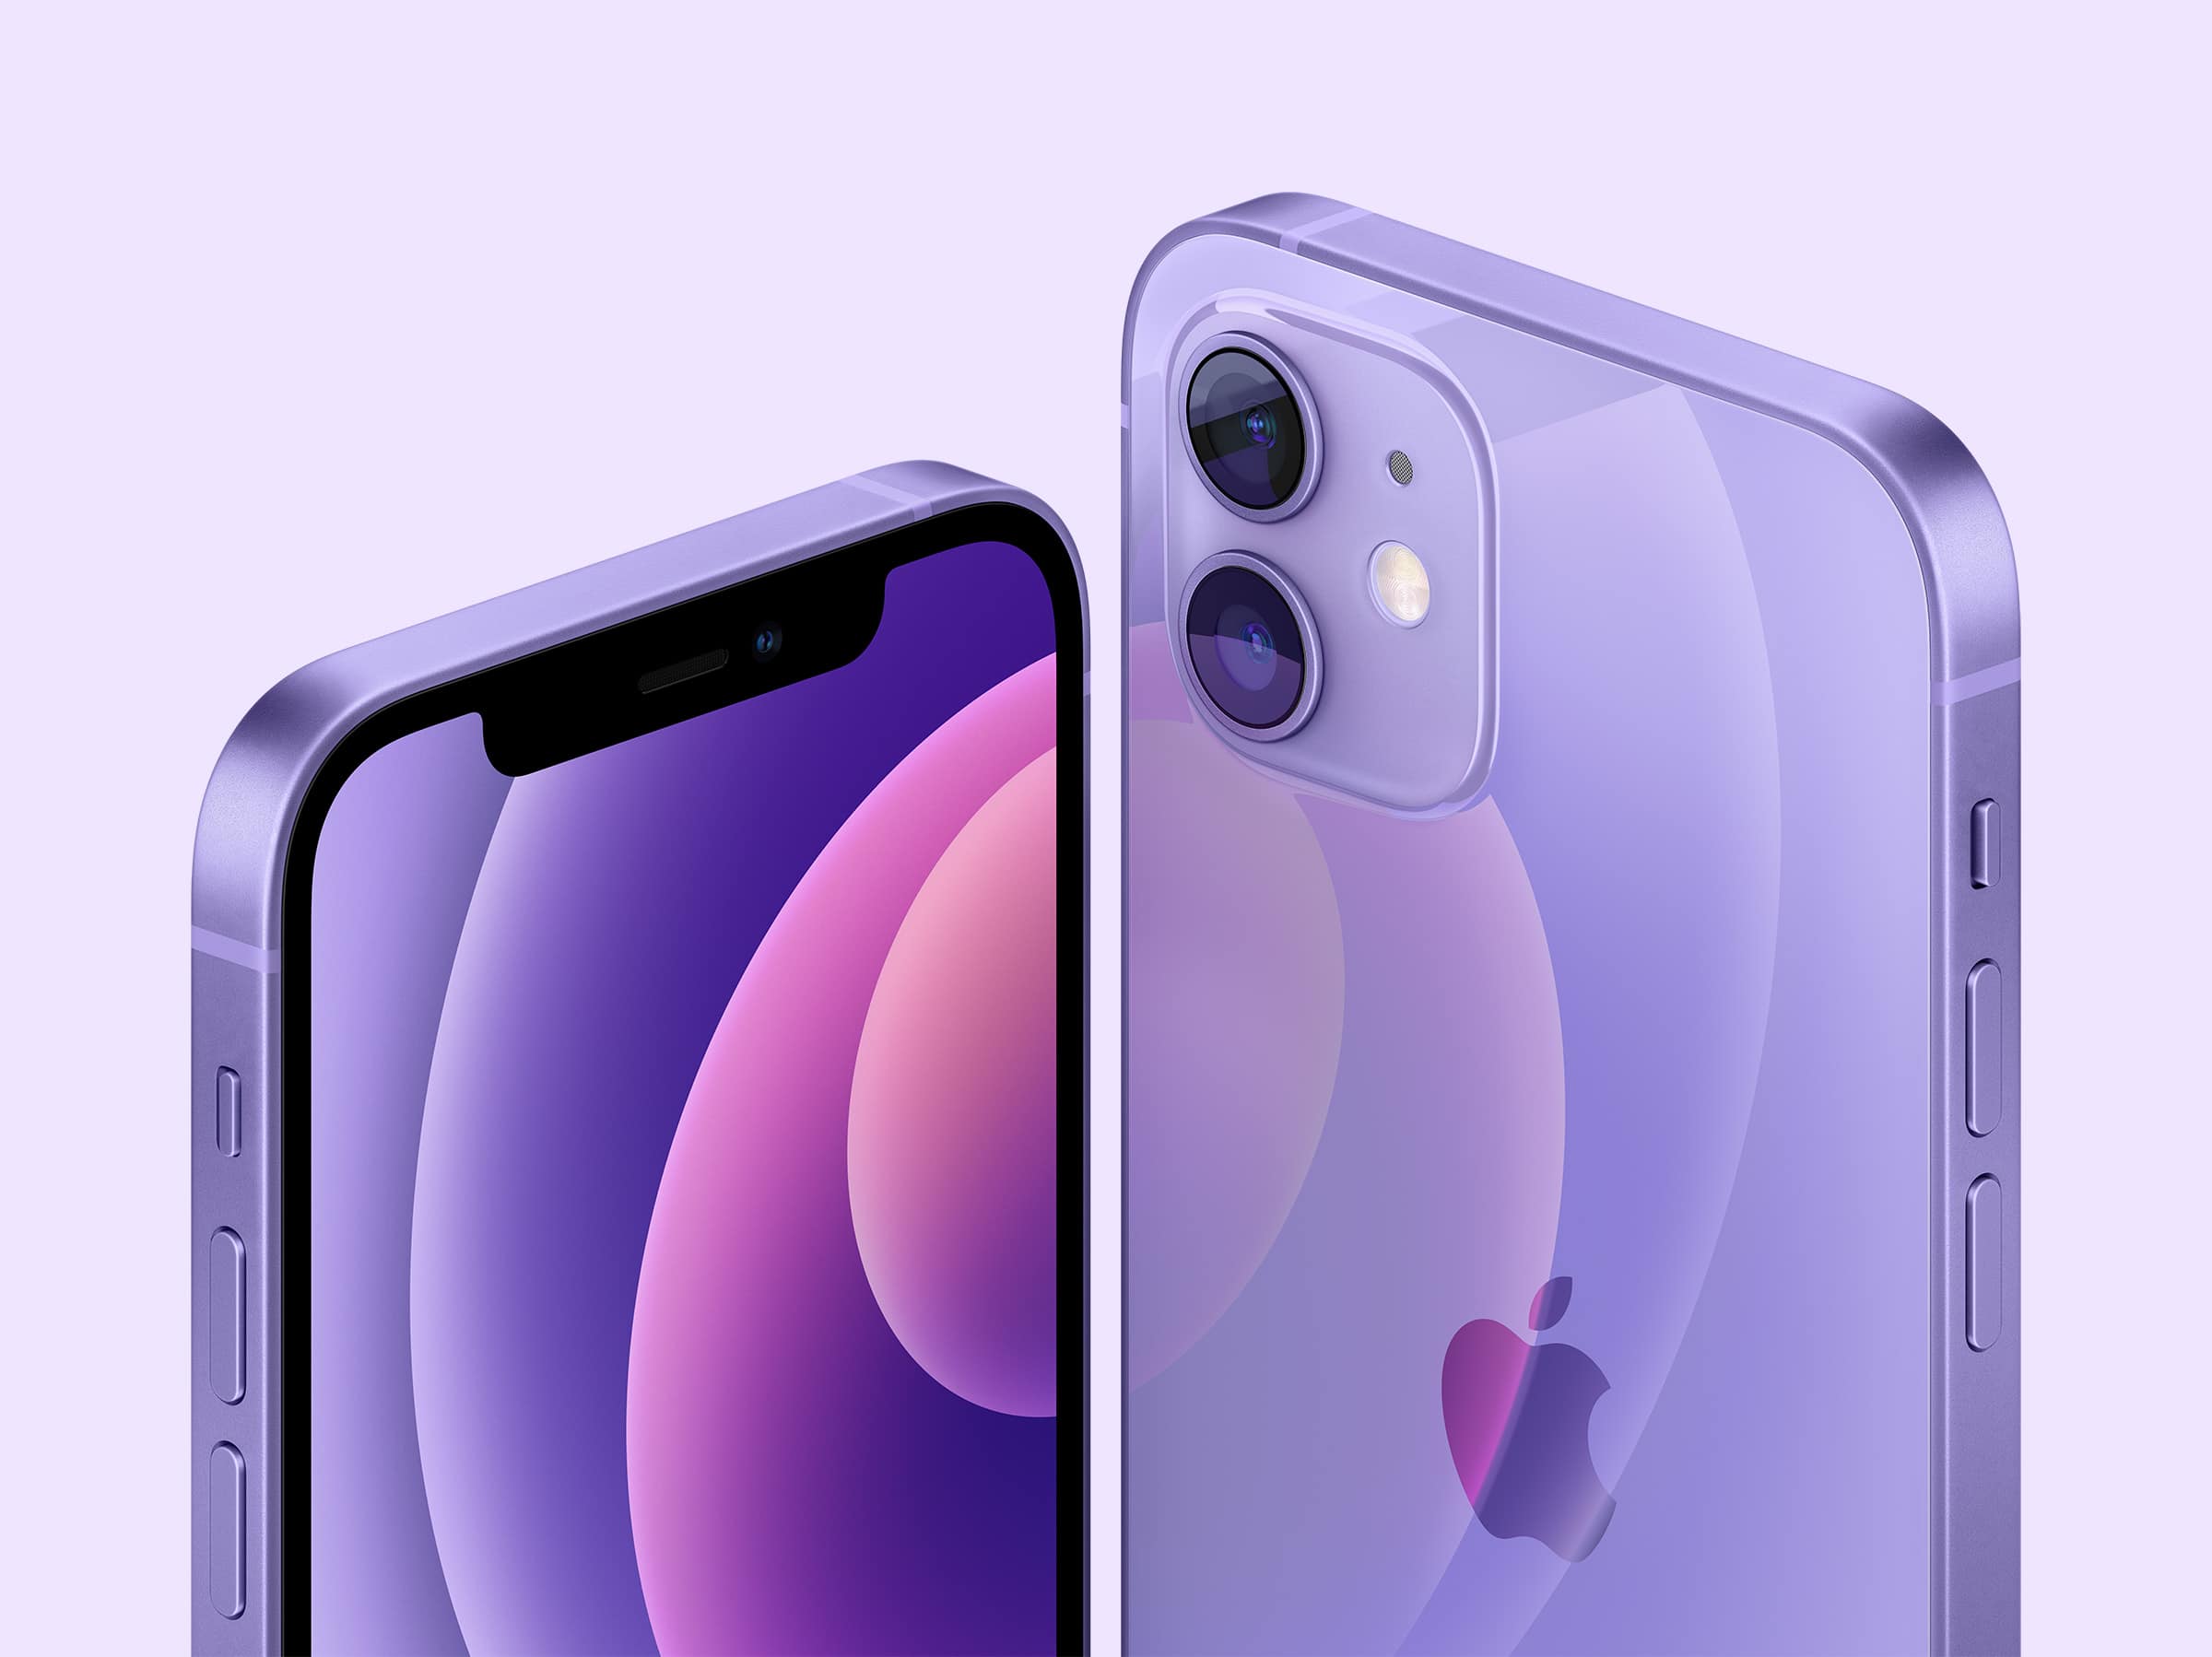 The iPhone 12 and 12 mini now come in purple